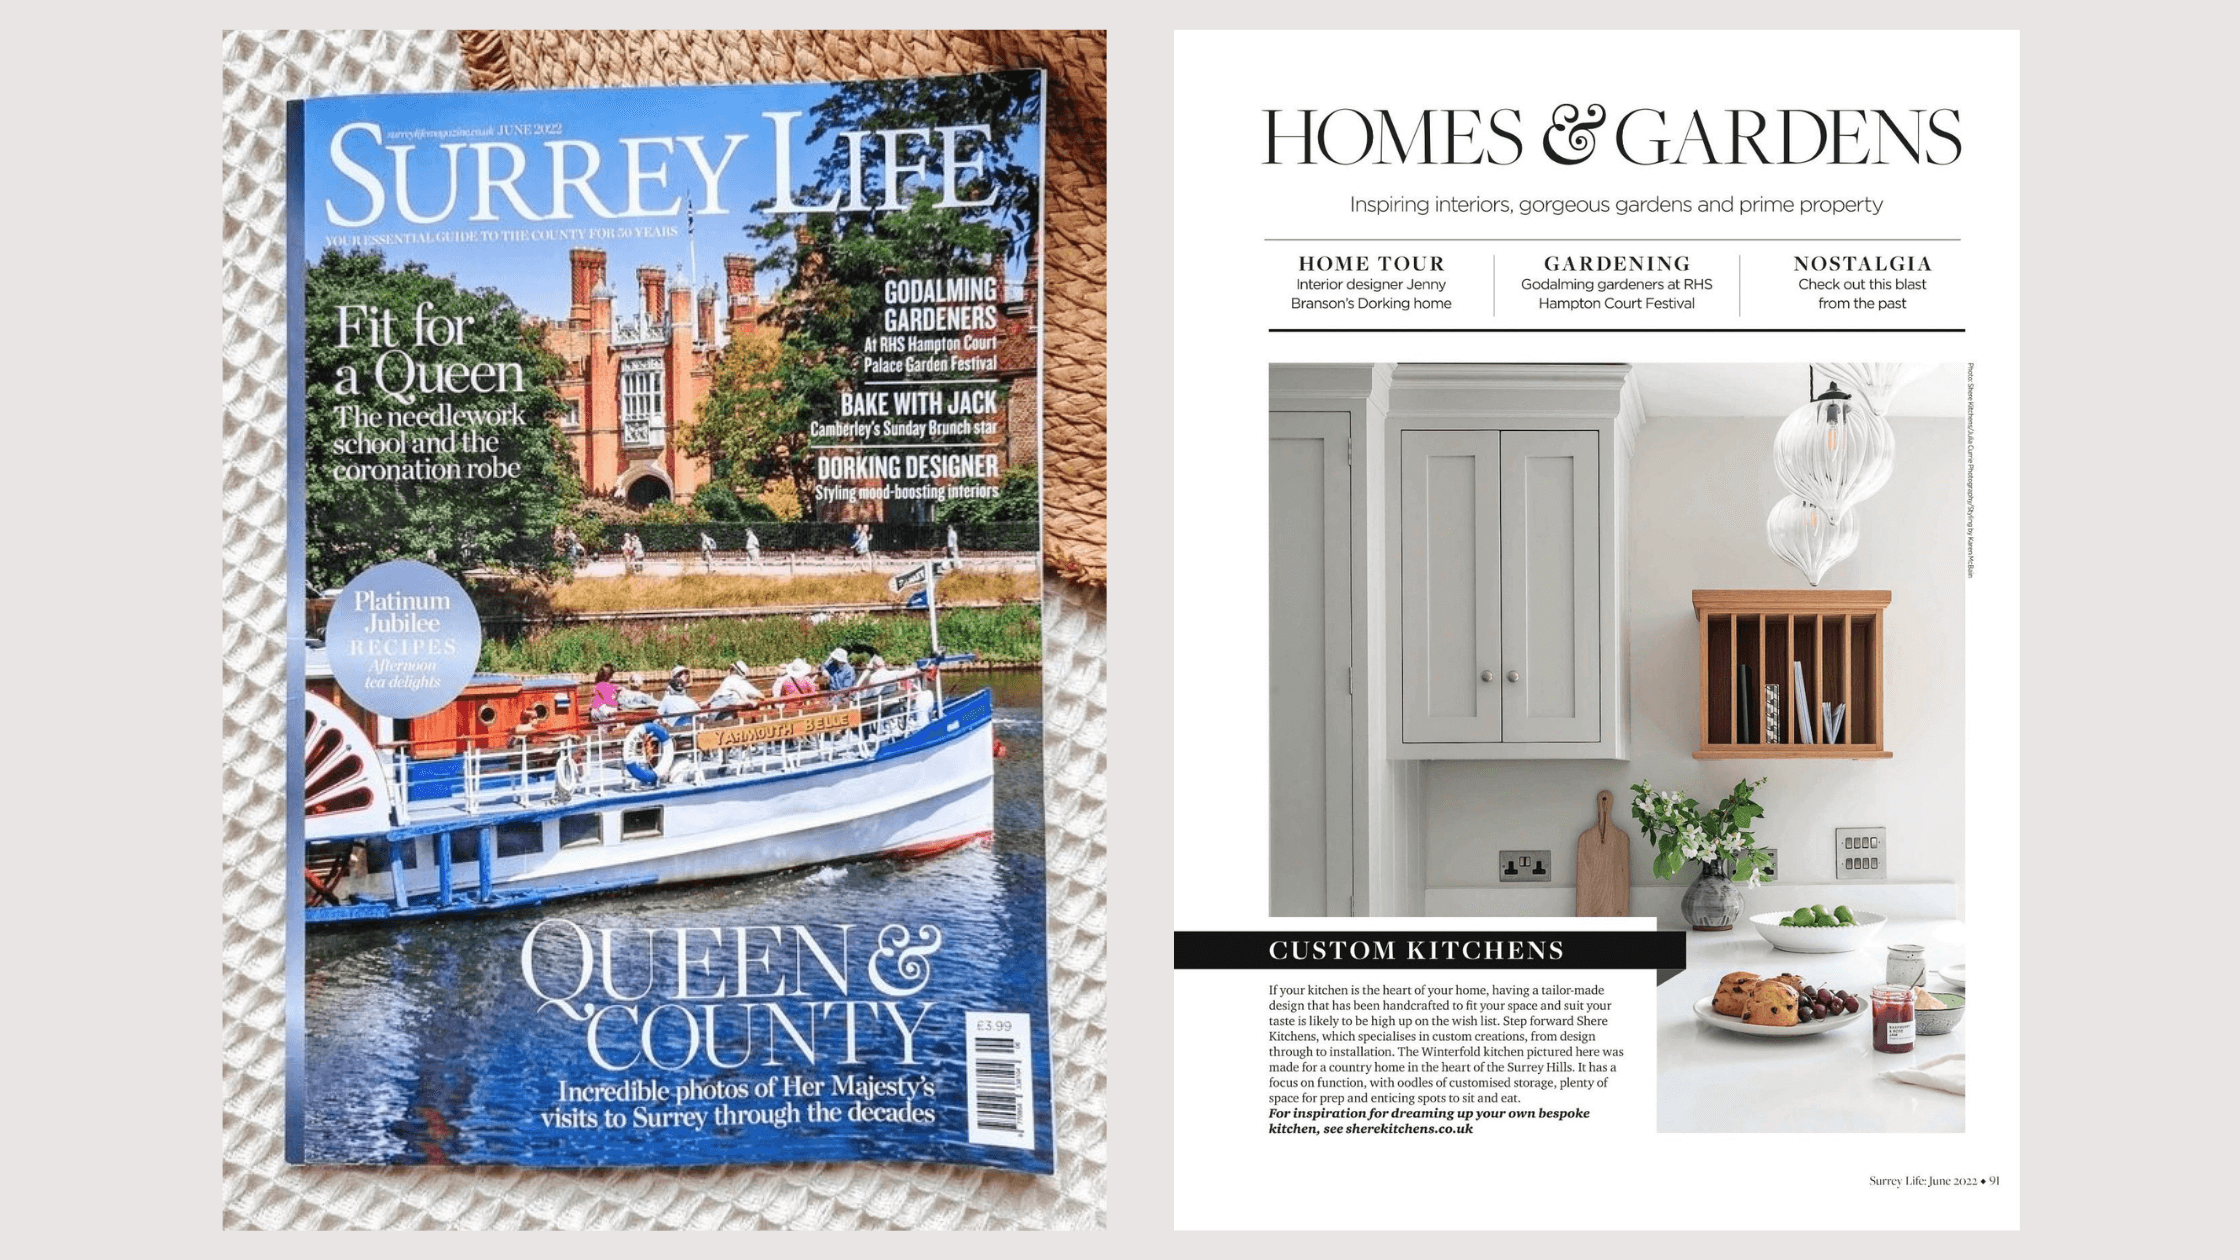 Shere Kitchens Featured in Surrey Life Magazine